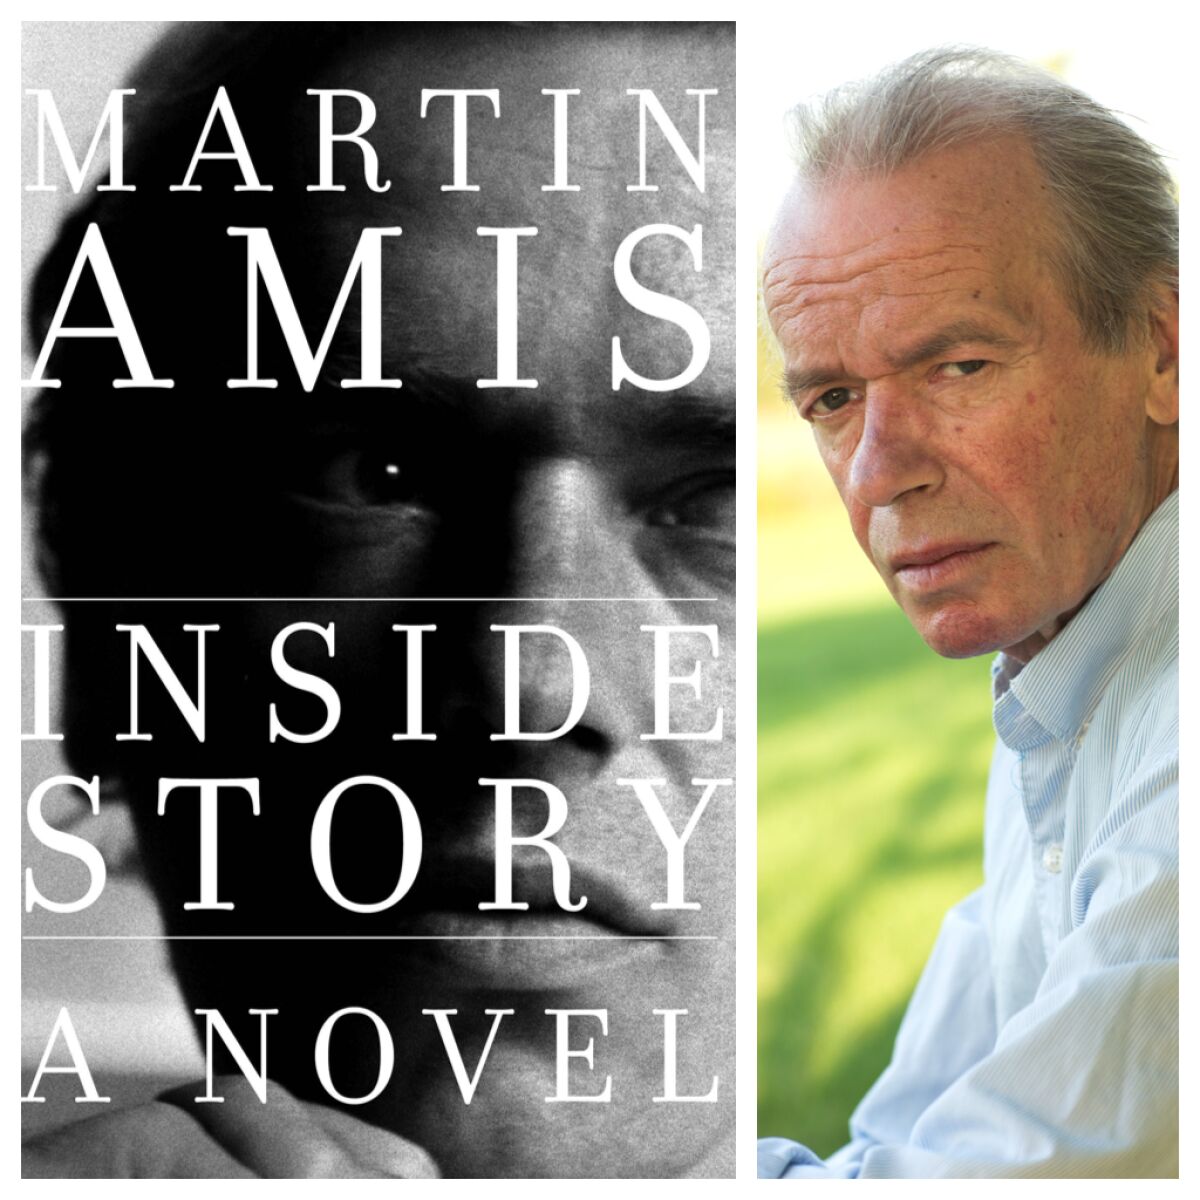 Martin Amis, right, and the cover of his new novel, "Inside Story."